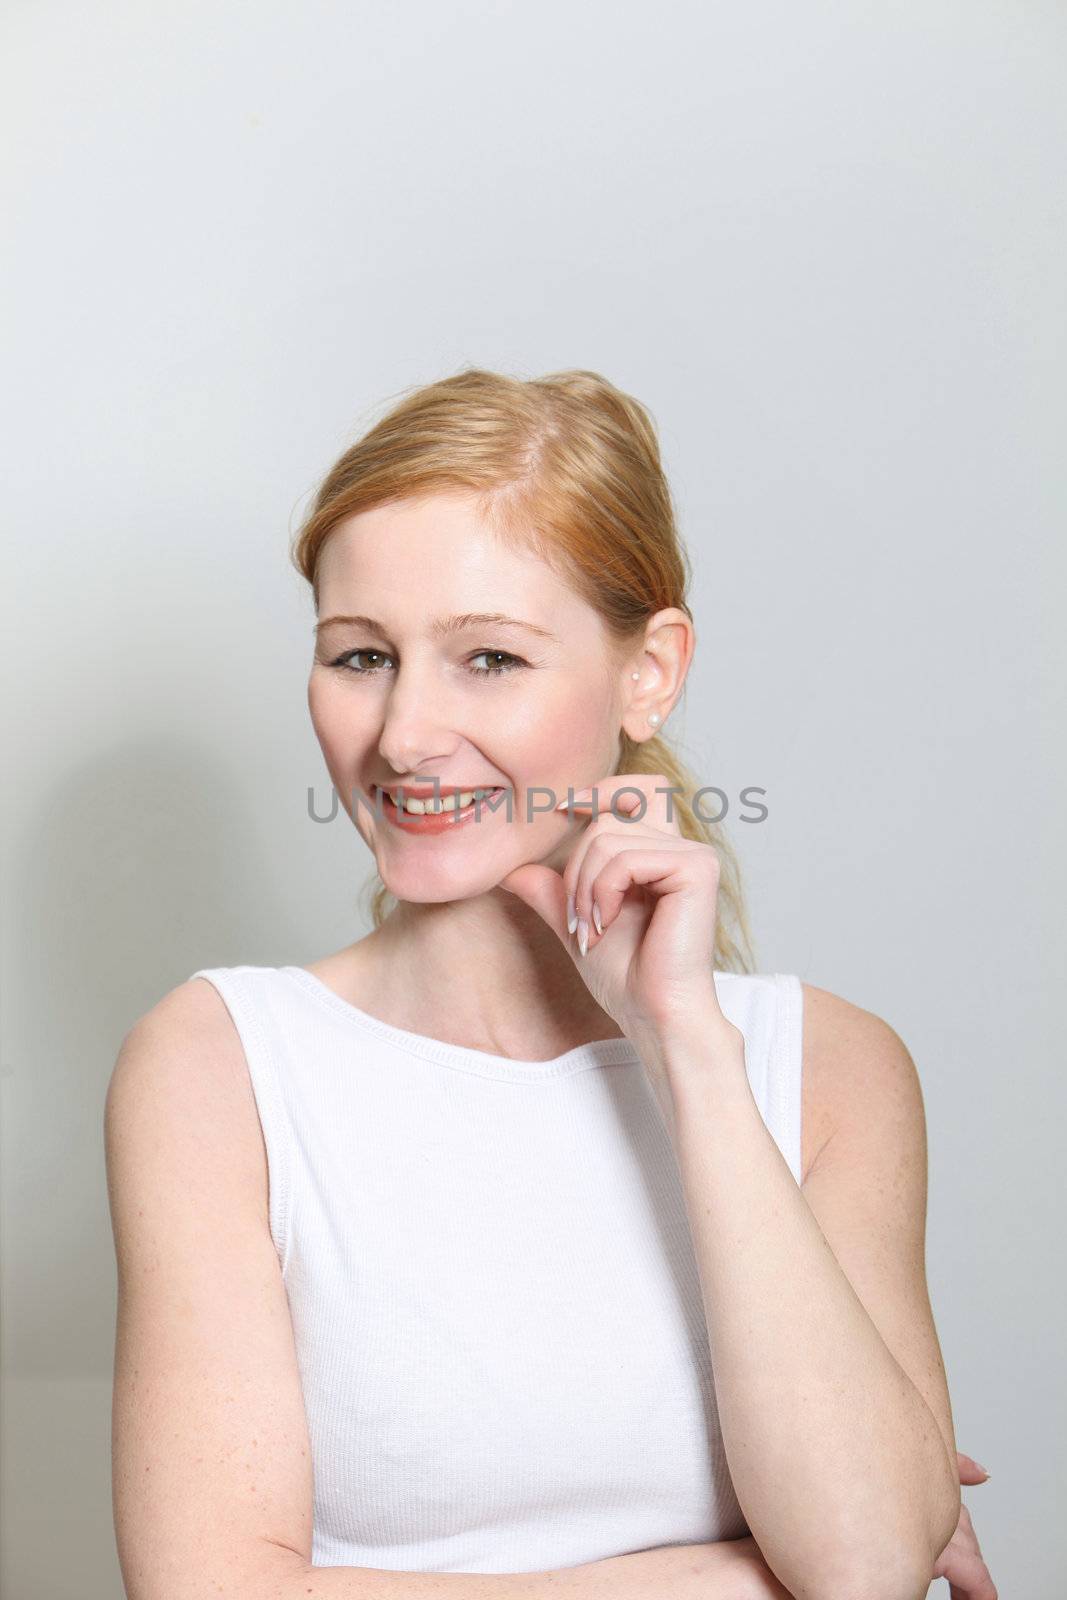 Portait of a young, cheerful woman - portrait format
